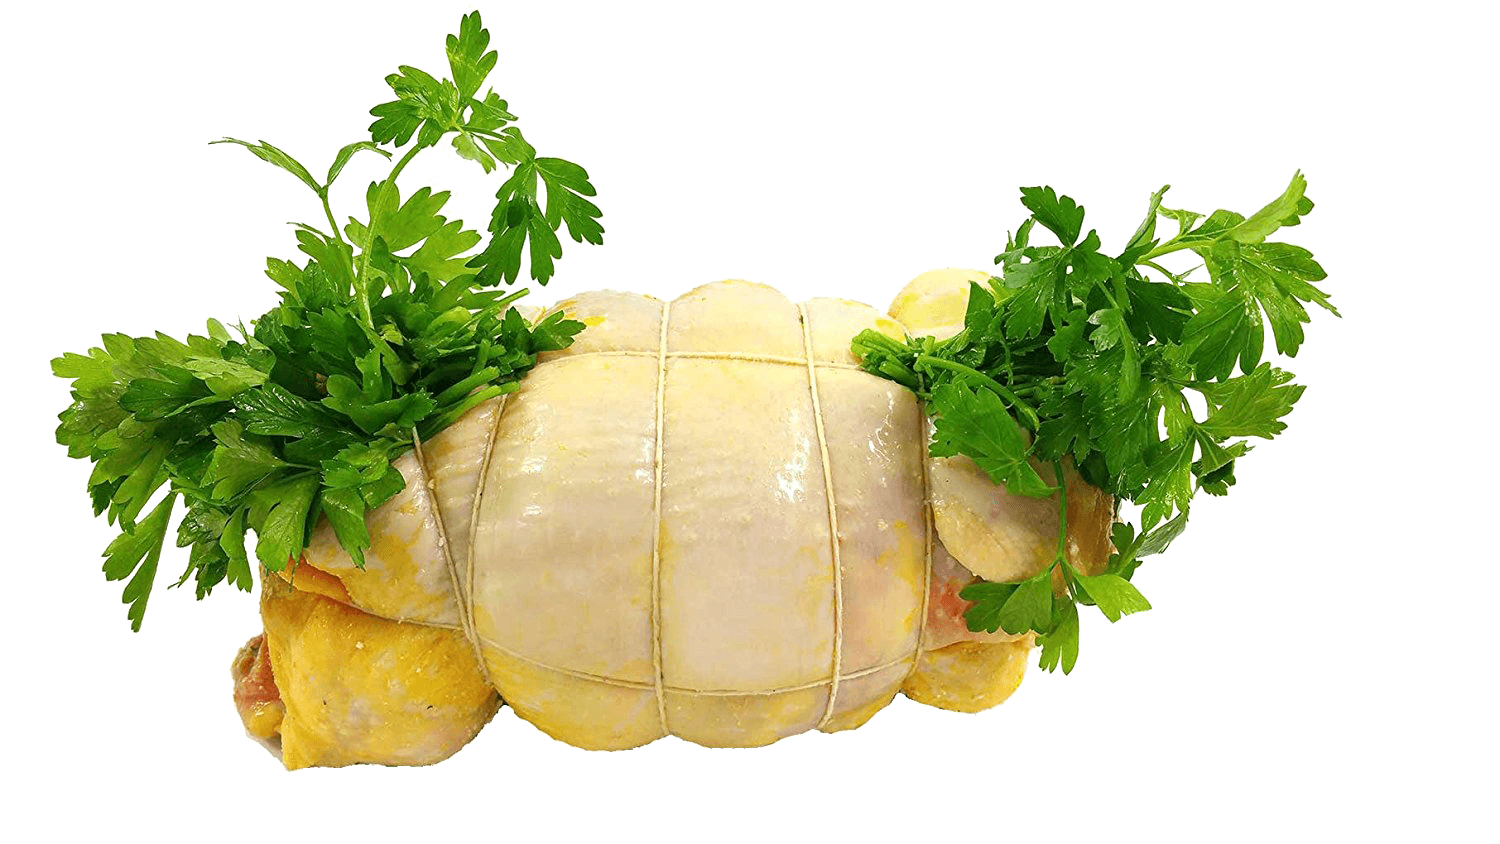 Fresh Local Meat Delivery - Deboned Whole Stuffed Chicken Roast Oven Ready (4 Pounds)